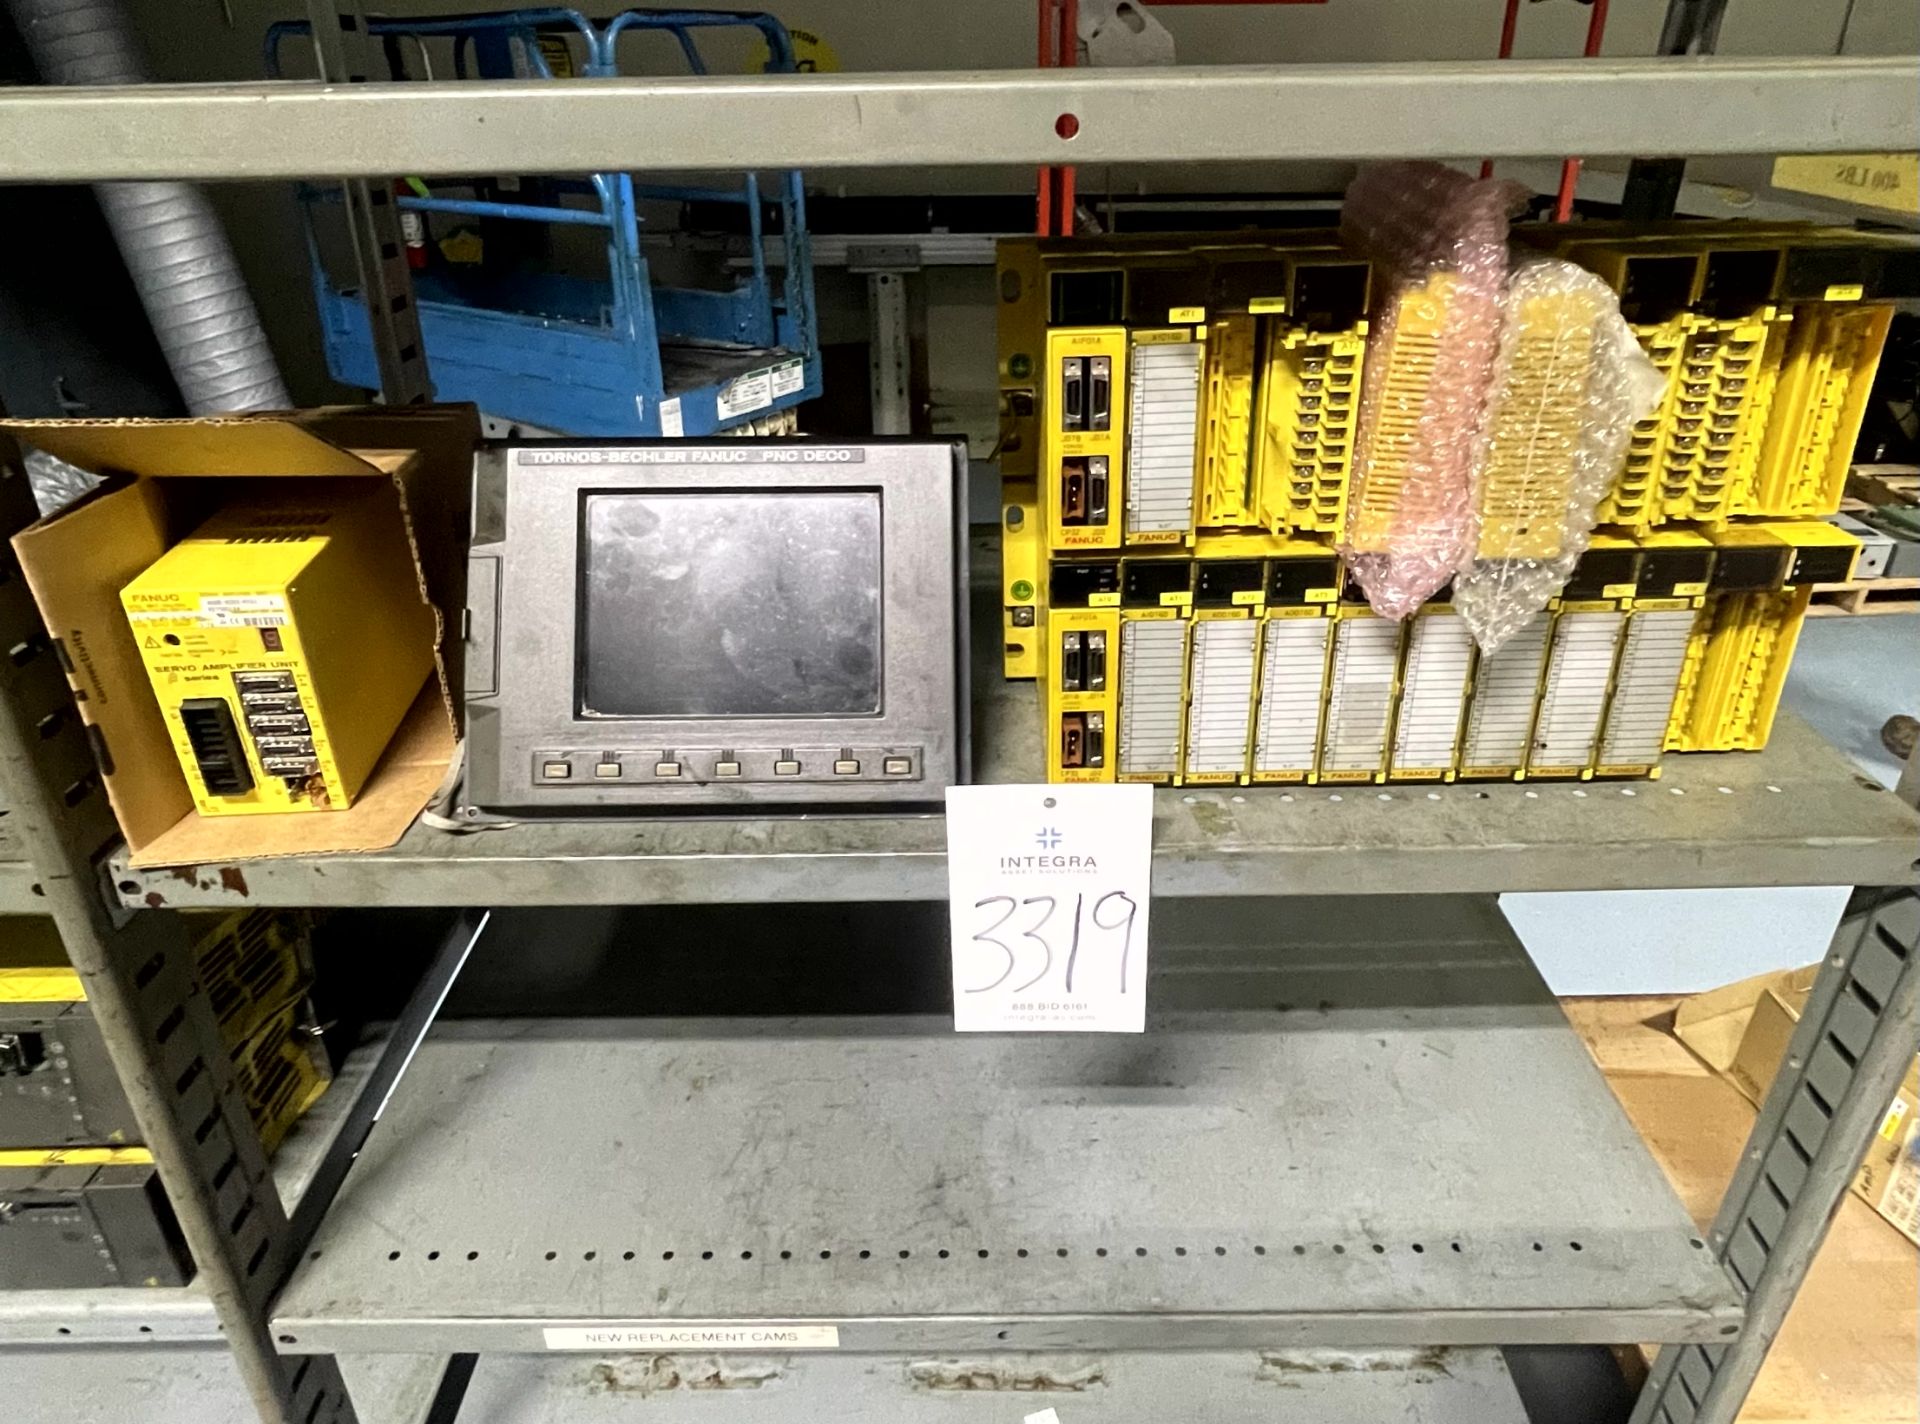 (4) Assorted Fanuc Modules and Displays